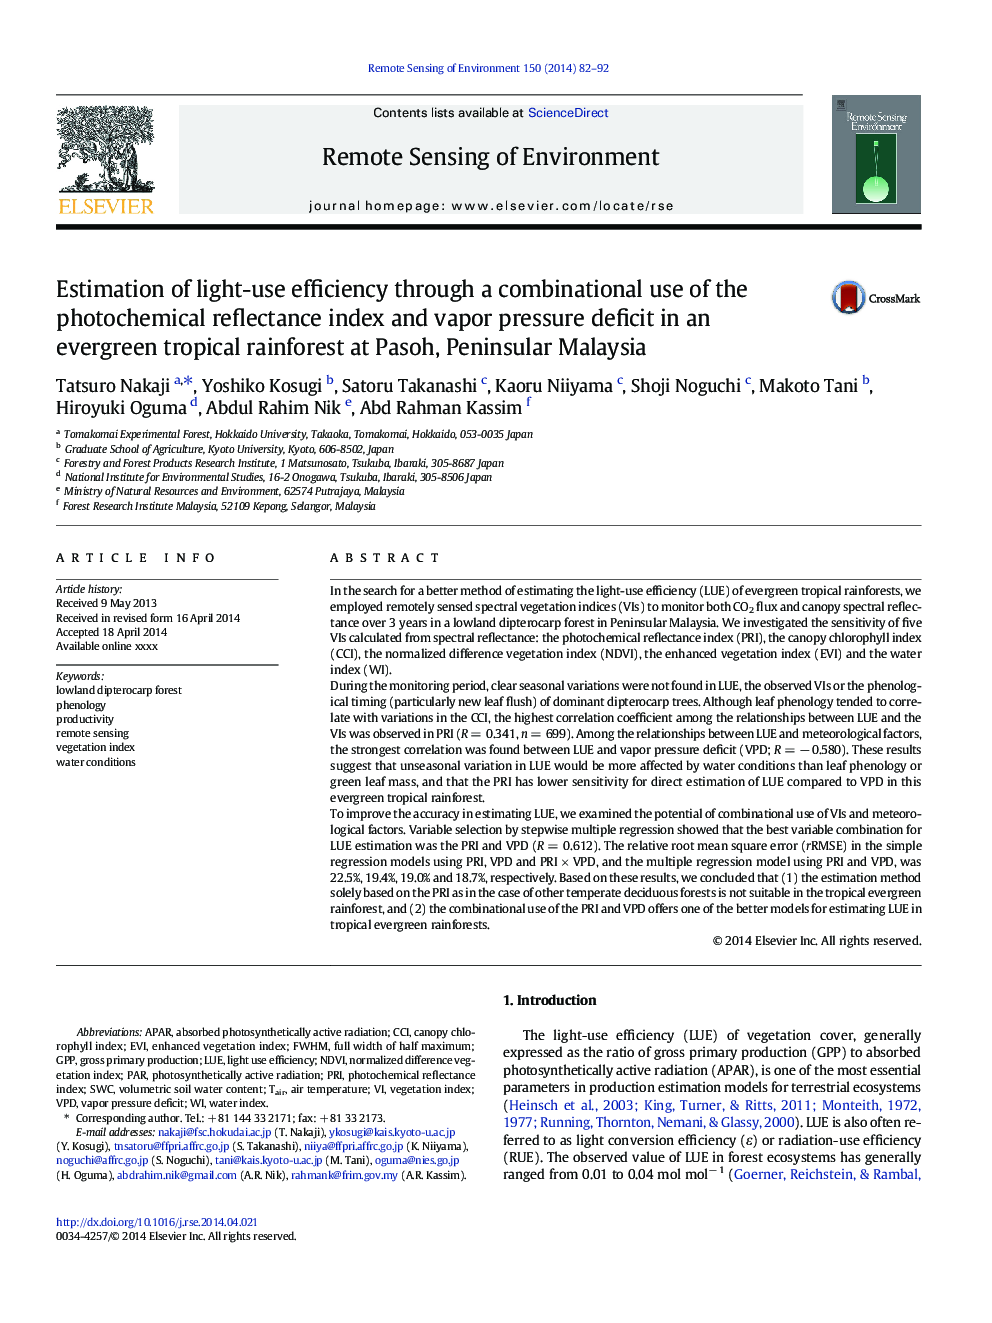 Estimation of light-use efficiency through a combinational use of the photochemical reflectance index and vapor pressure deficit in an evergreen tropical rainforest at Pasoh, Peninsular Malaysia